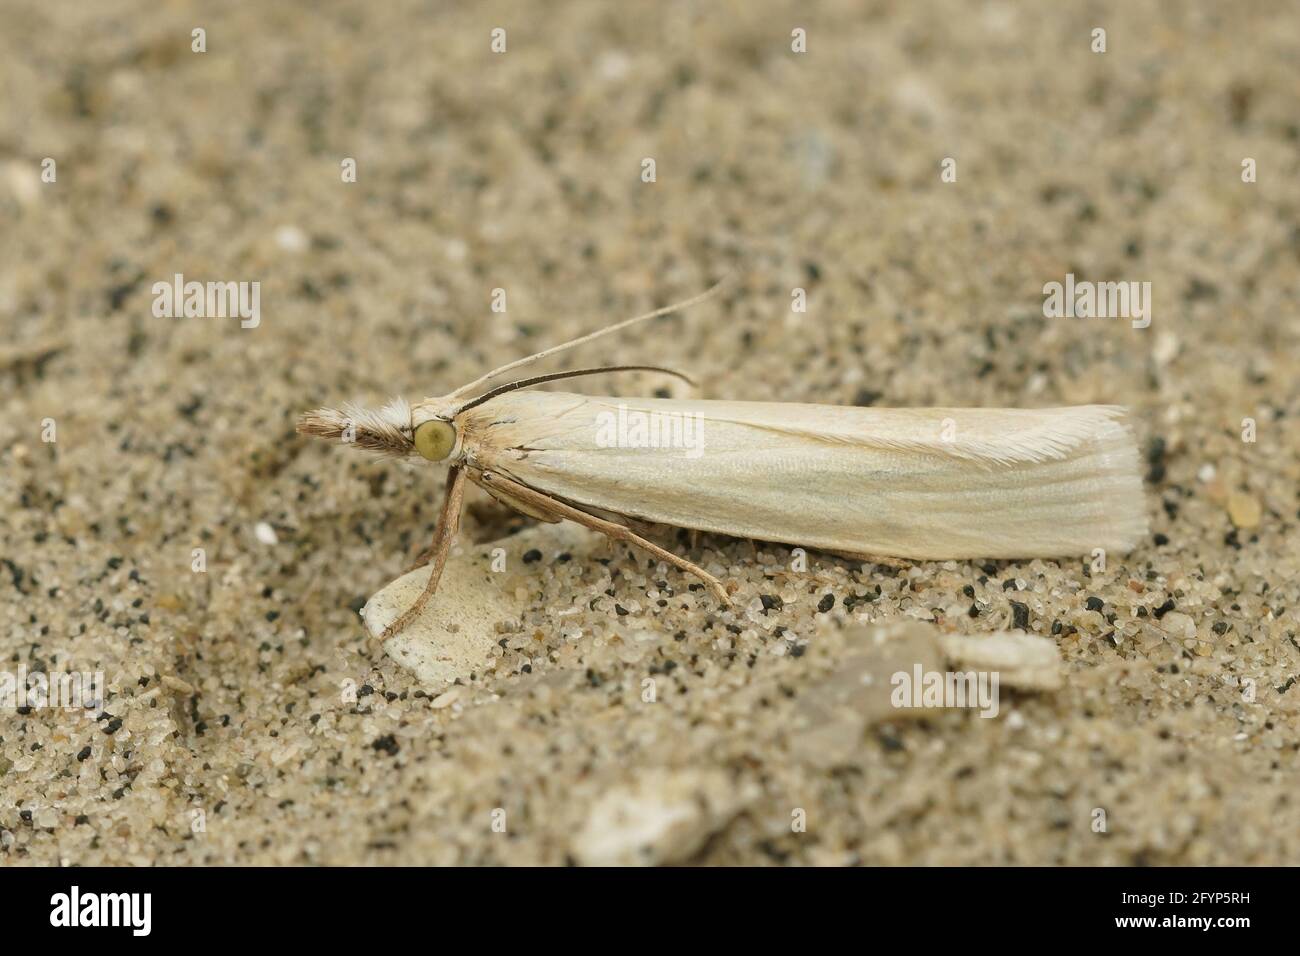 Closeup shot of a white-colored Satin Grass-veneer on a brown sandy surface Stock Photo